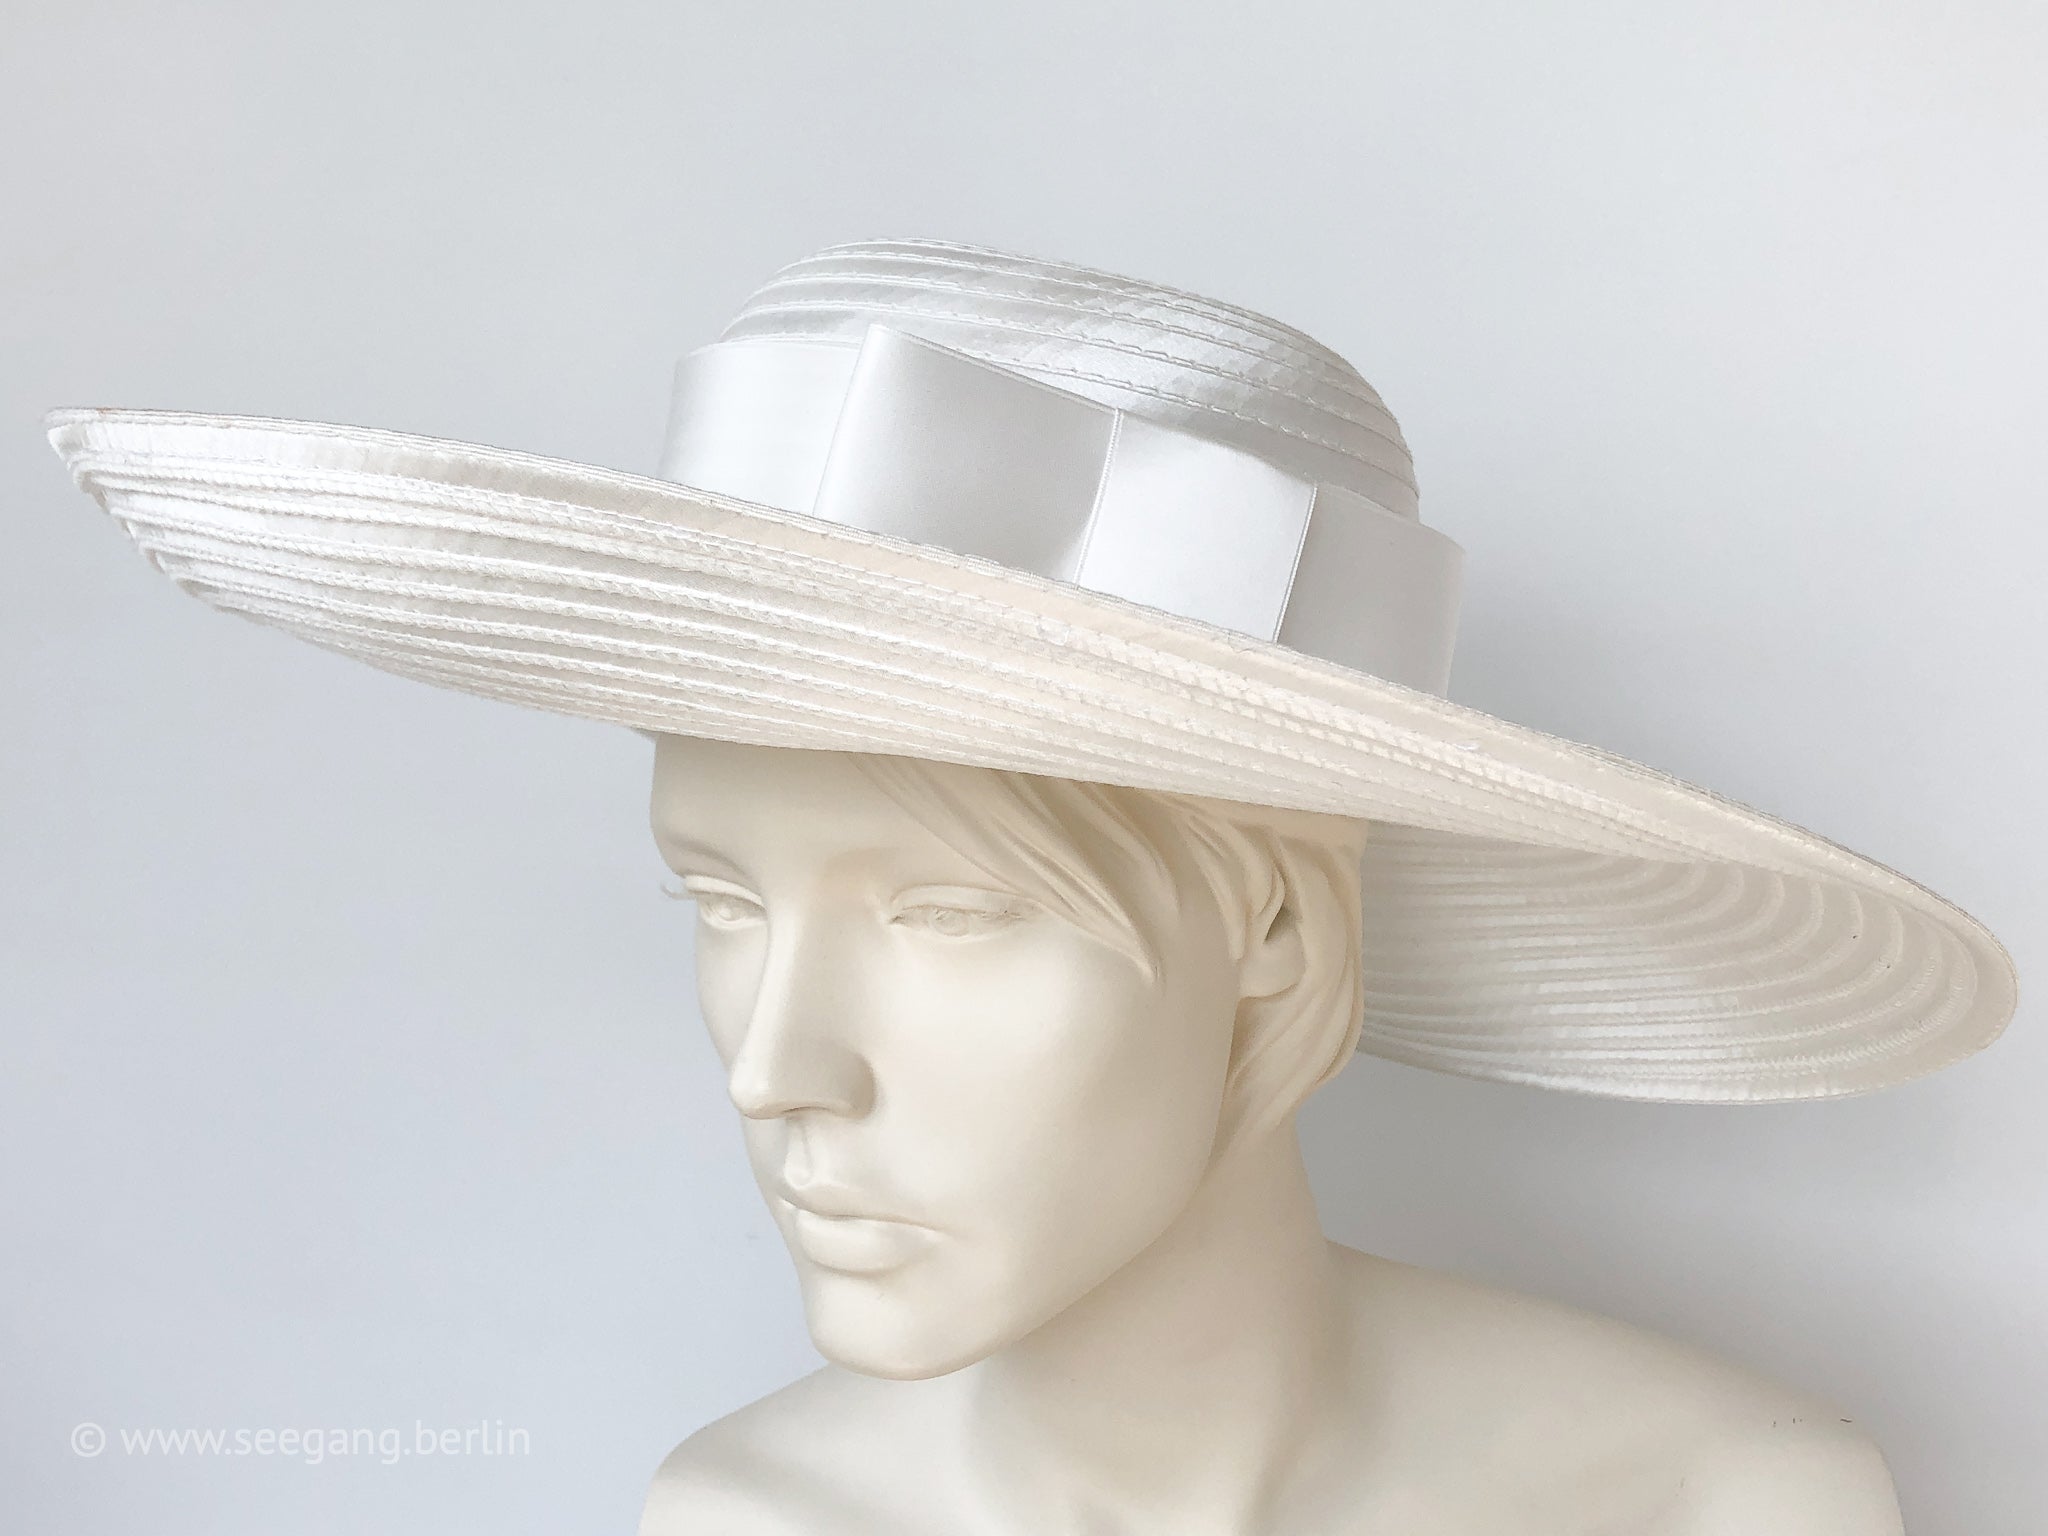 STATEMENT HAT - SUMMER WHITE WITH A WIDE BRIM AND A BOW